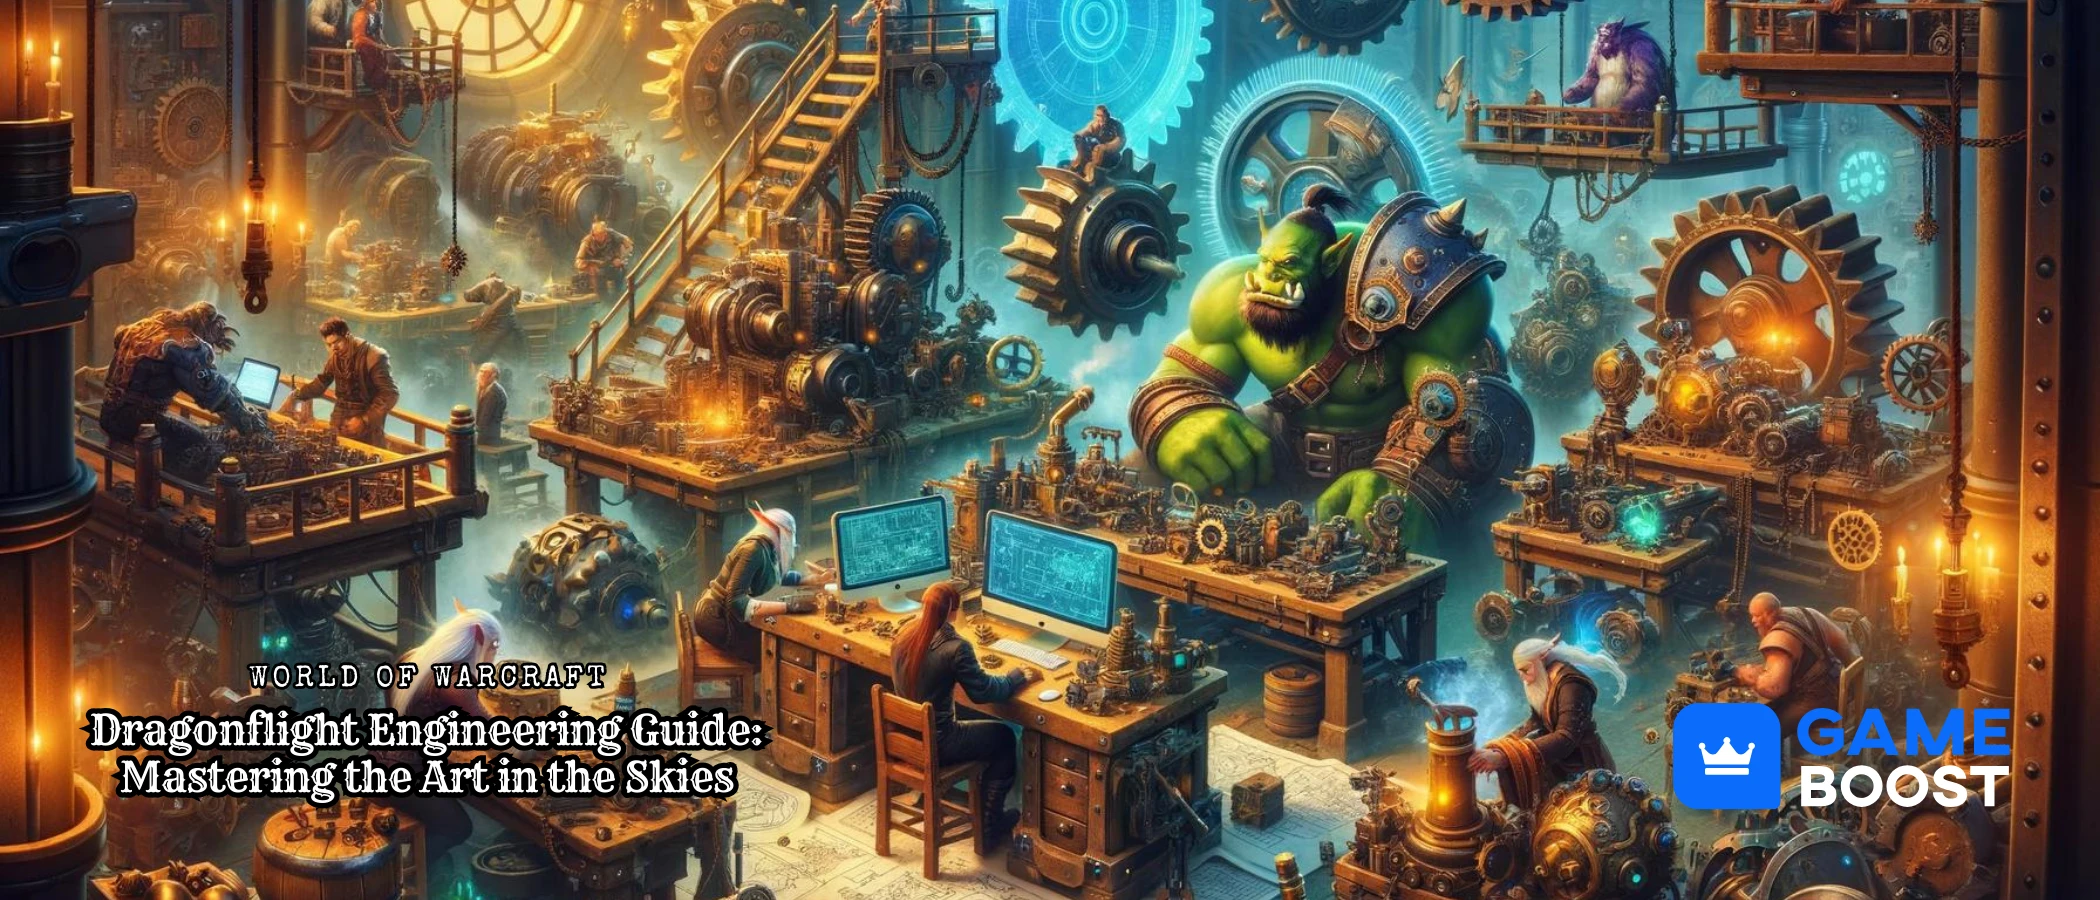 art representing engineering in world of warcraft, blog title and gameboost logo